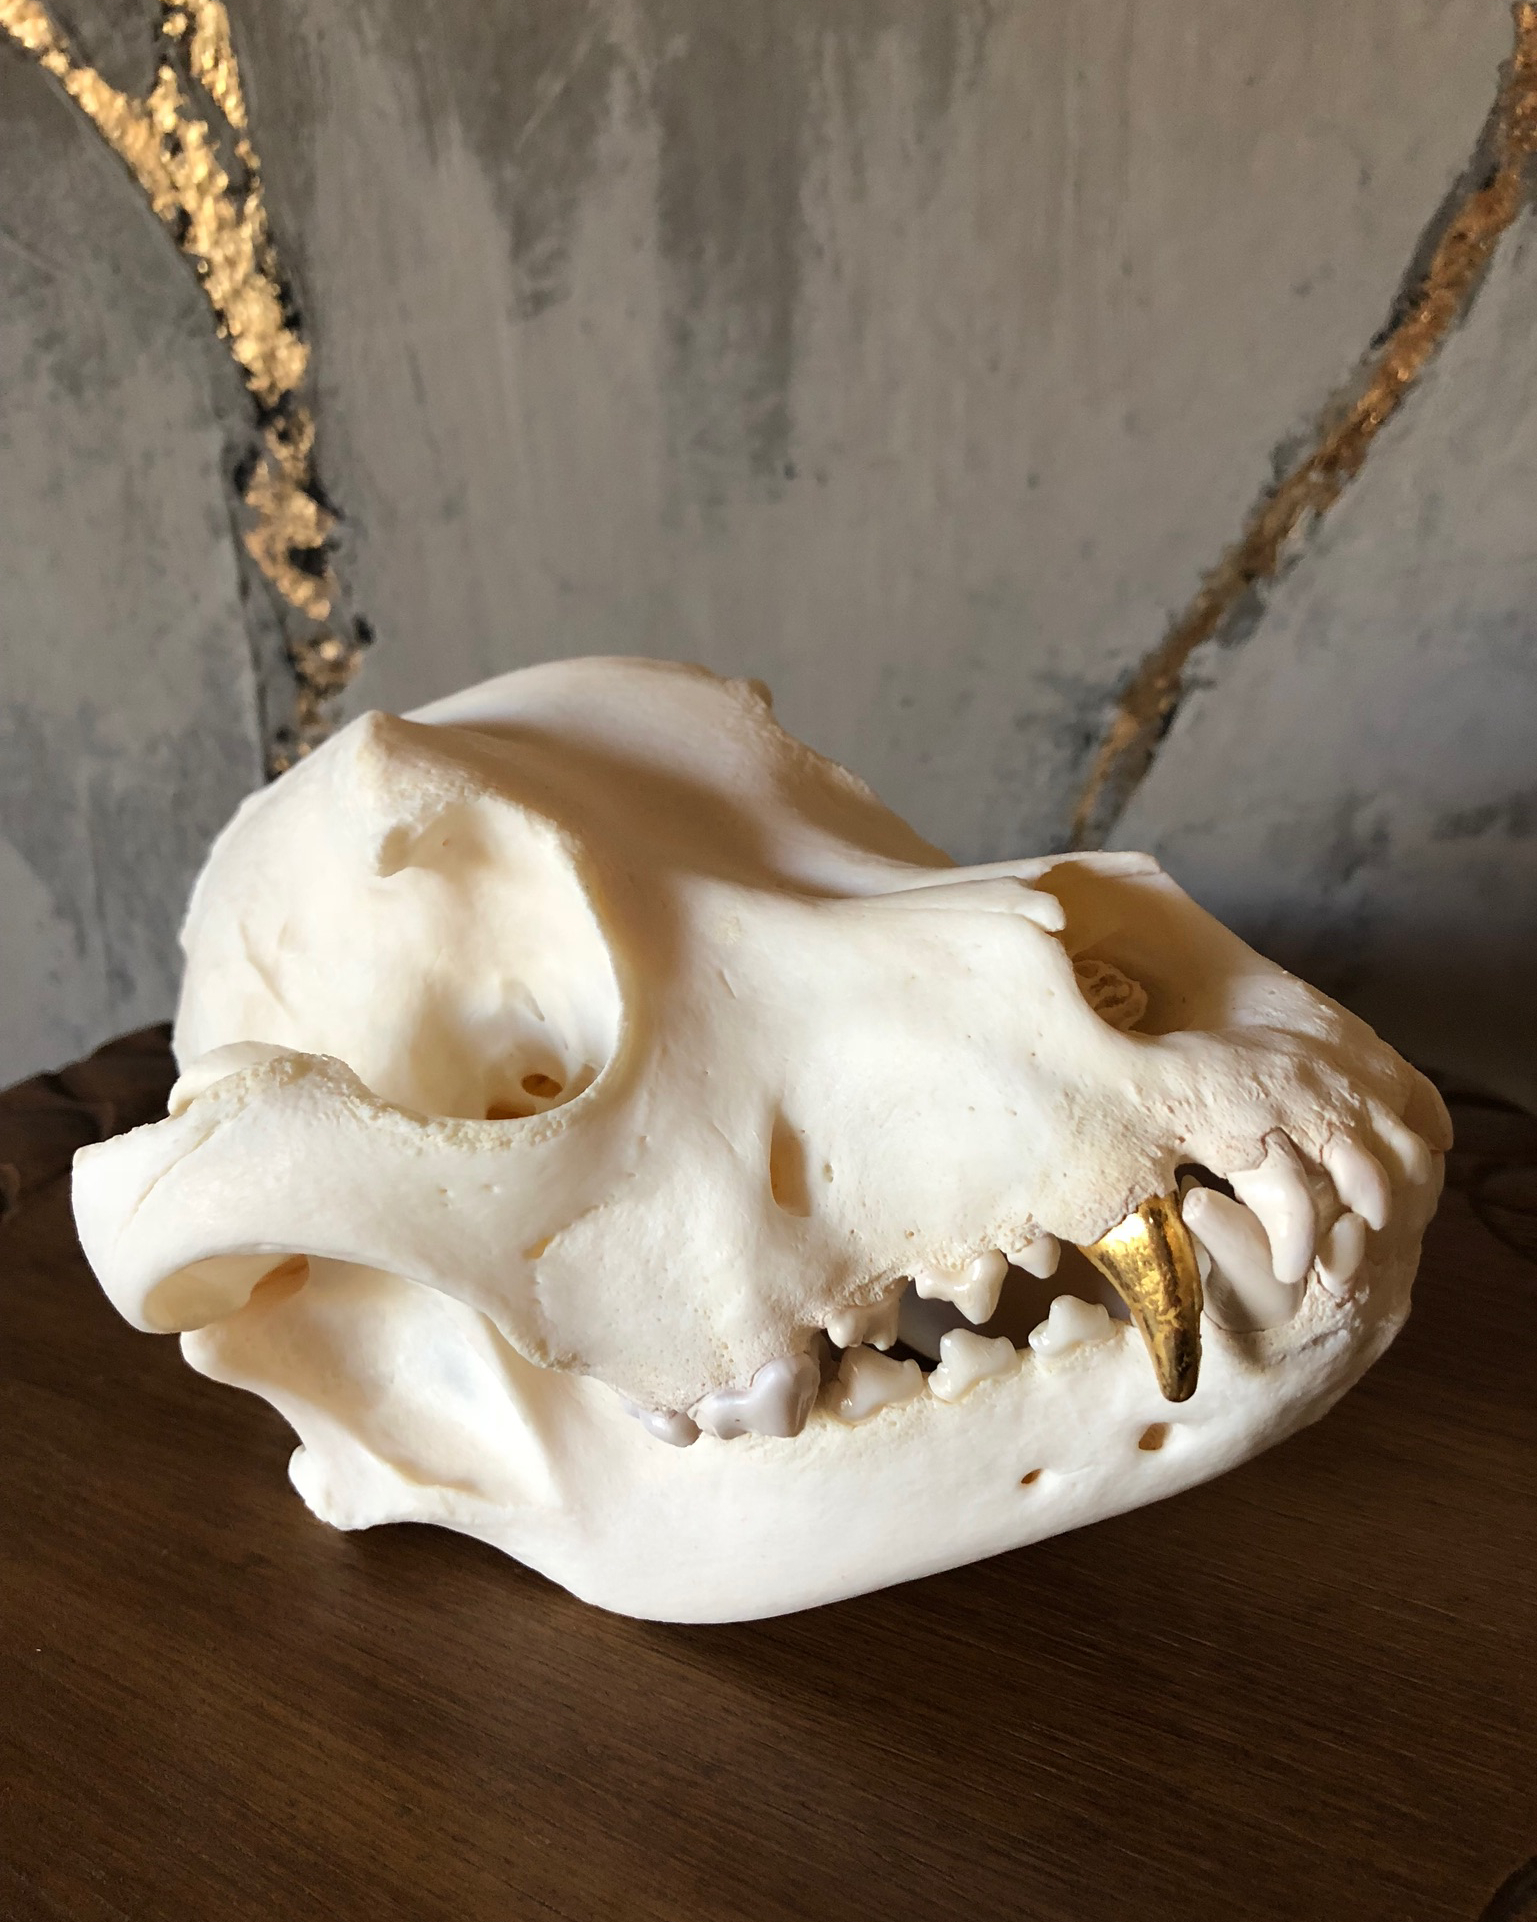 Dog skull with a single long incisor made of gold